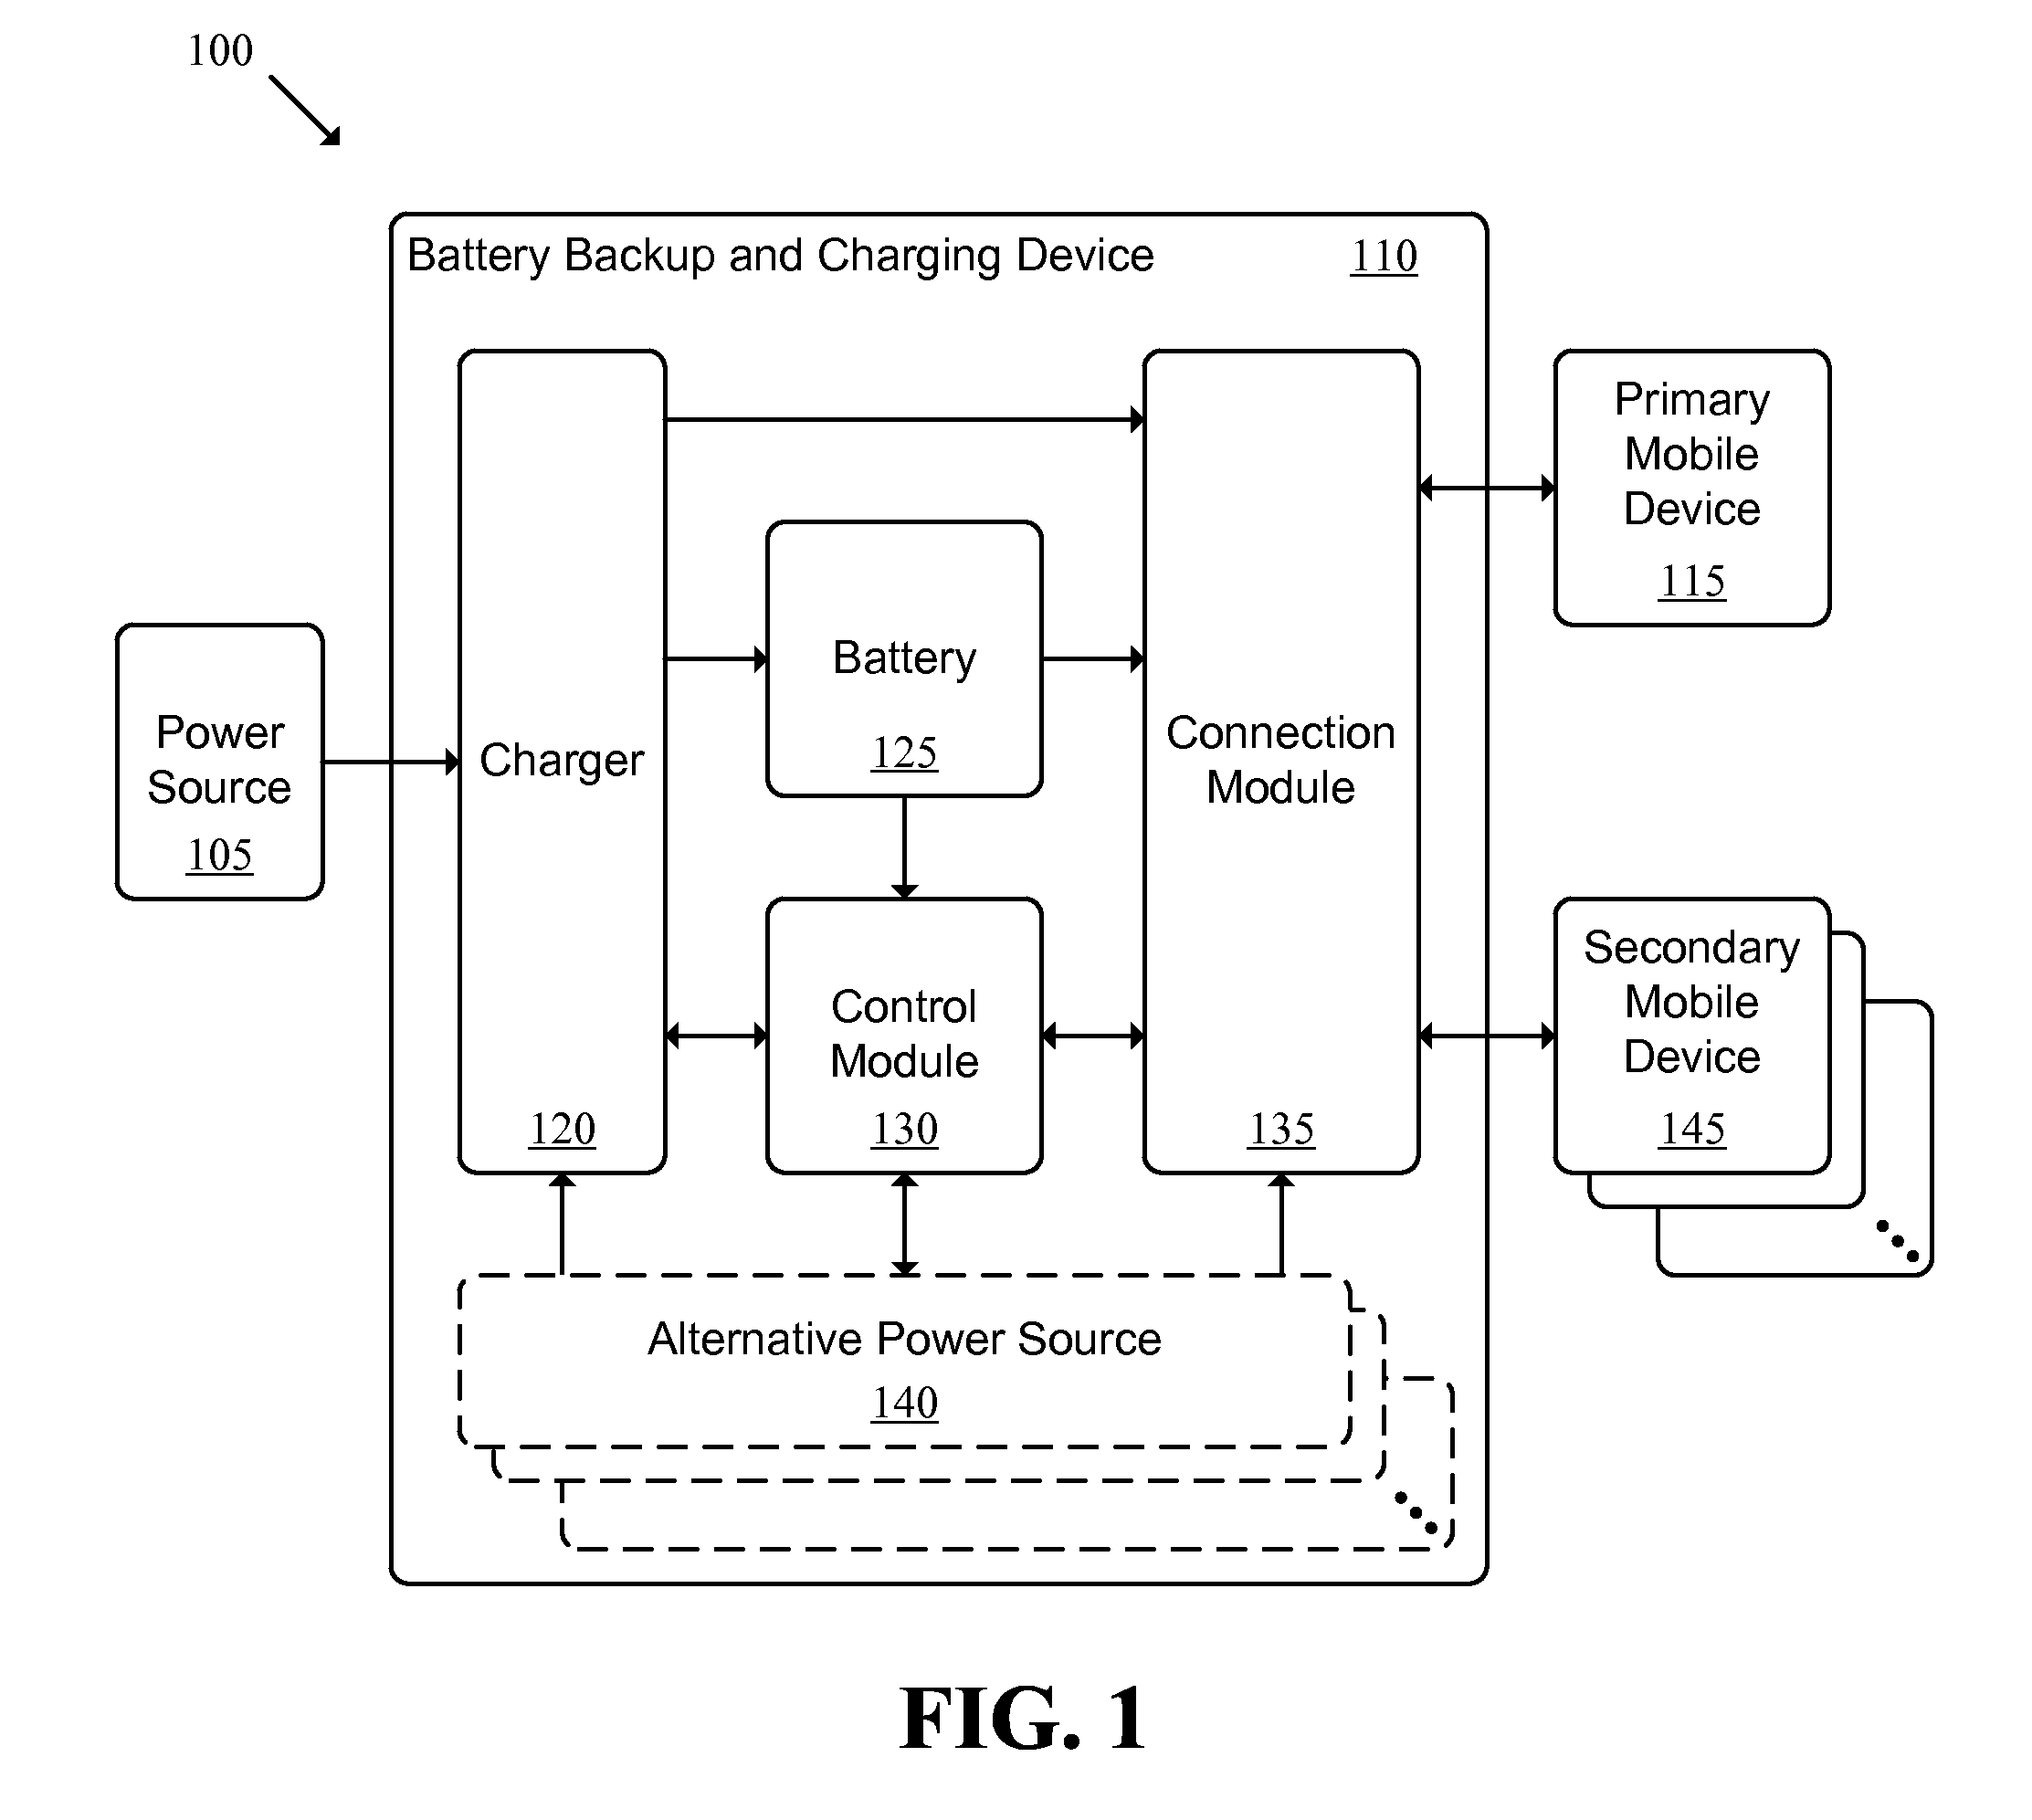 Integrated Battery Backup and Charging for Mobile Devices